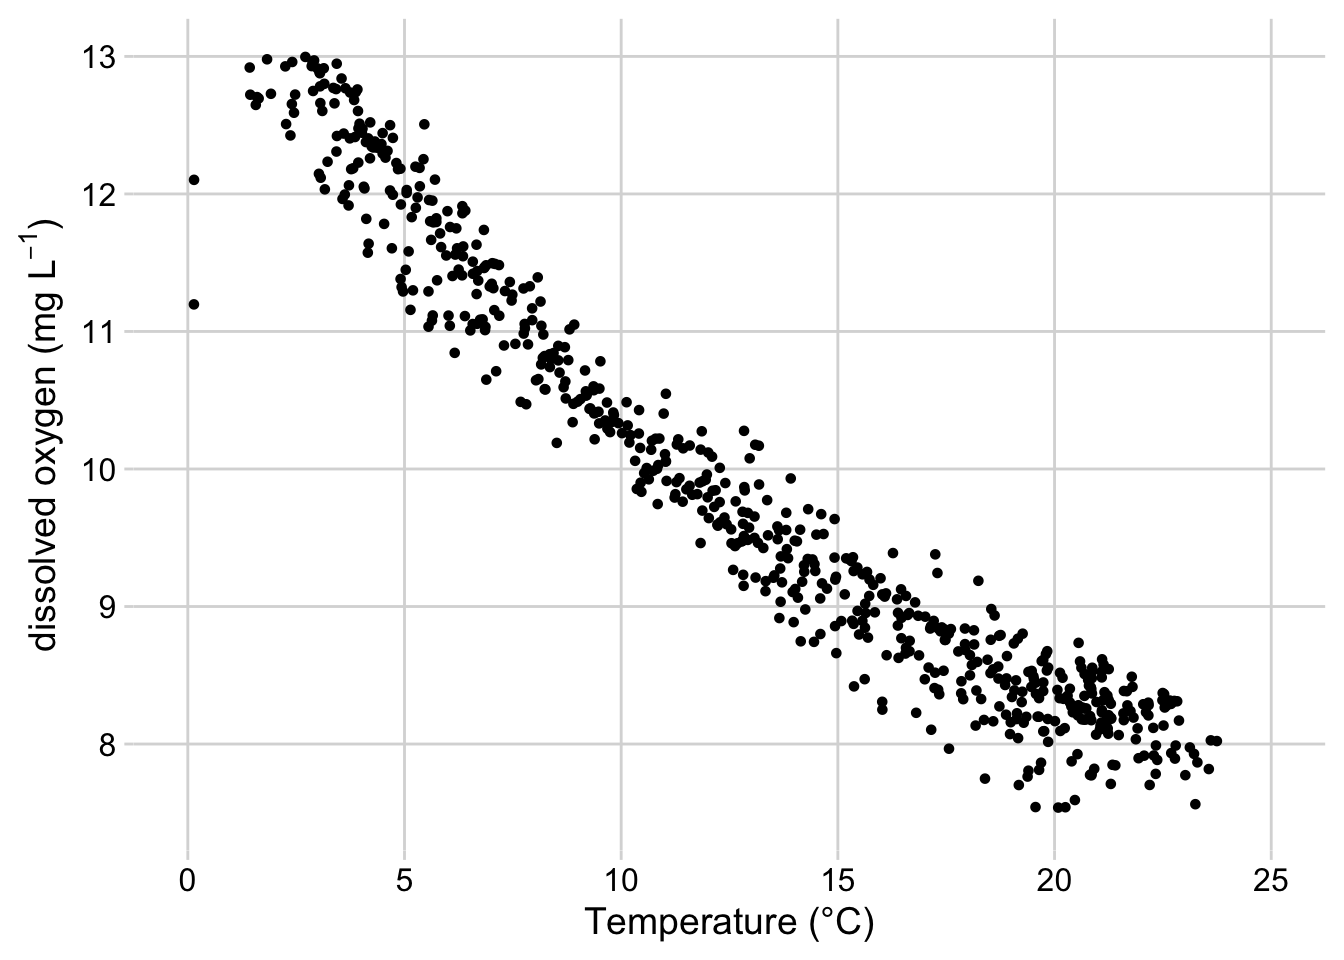 Scatterplot of dissolved oxygen concentrations vs. temperature at the Posey Creek NEON site, 2019-2020